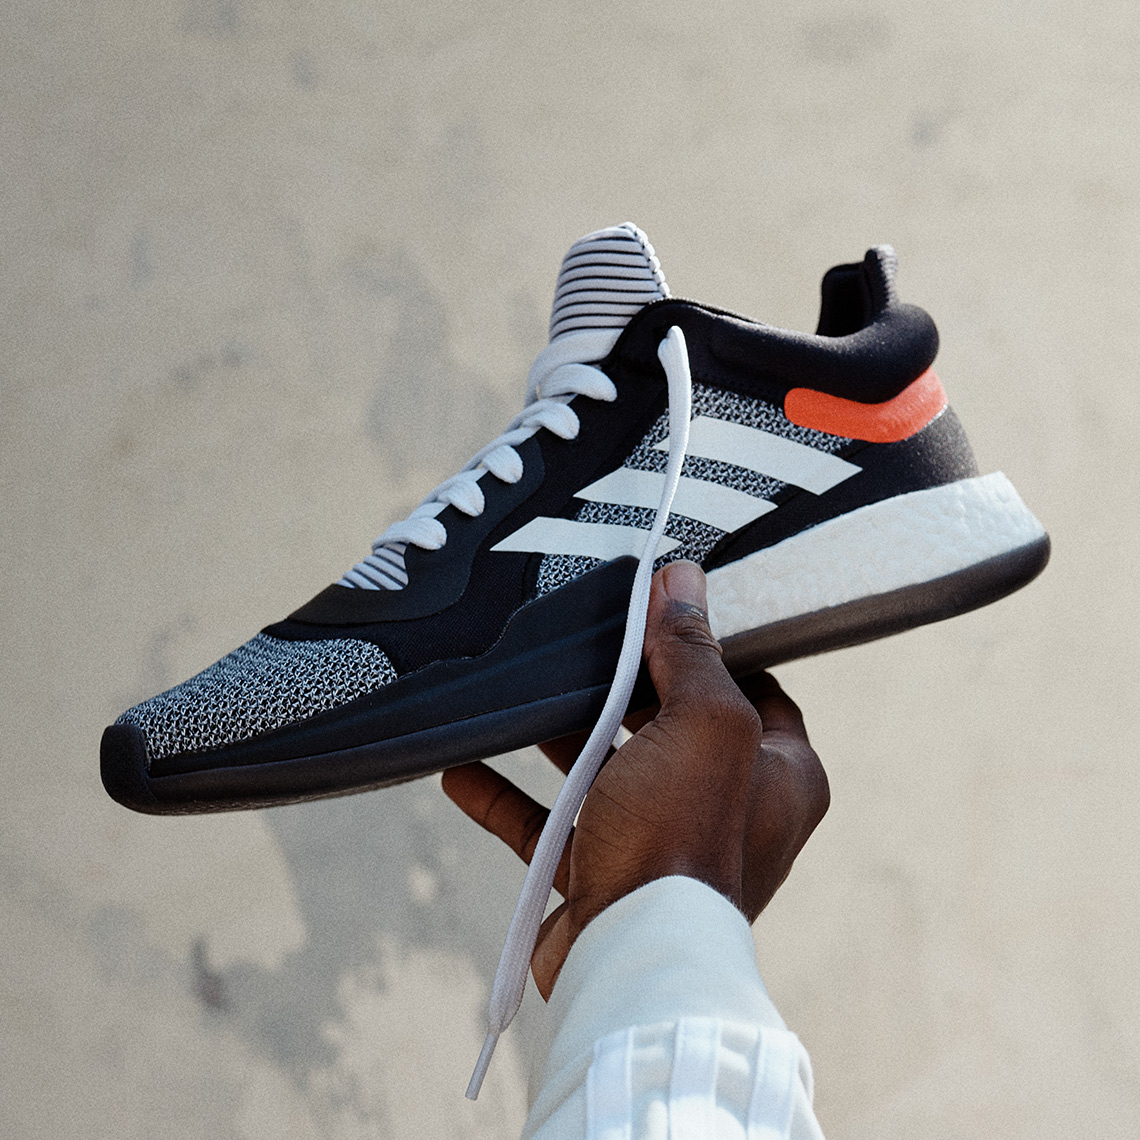 Adidas Marquee Boost Release Date 2